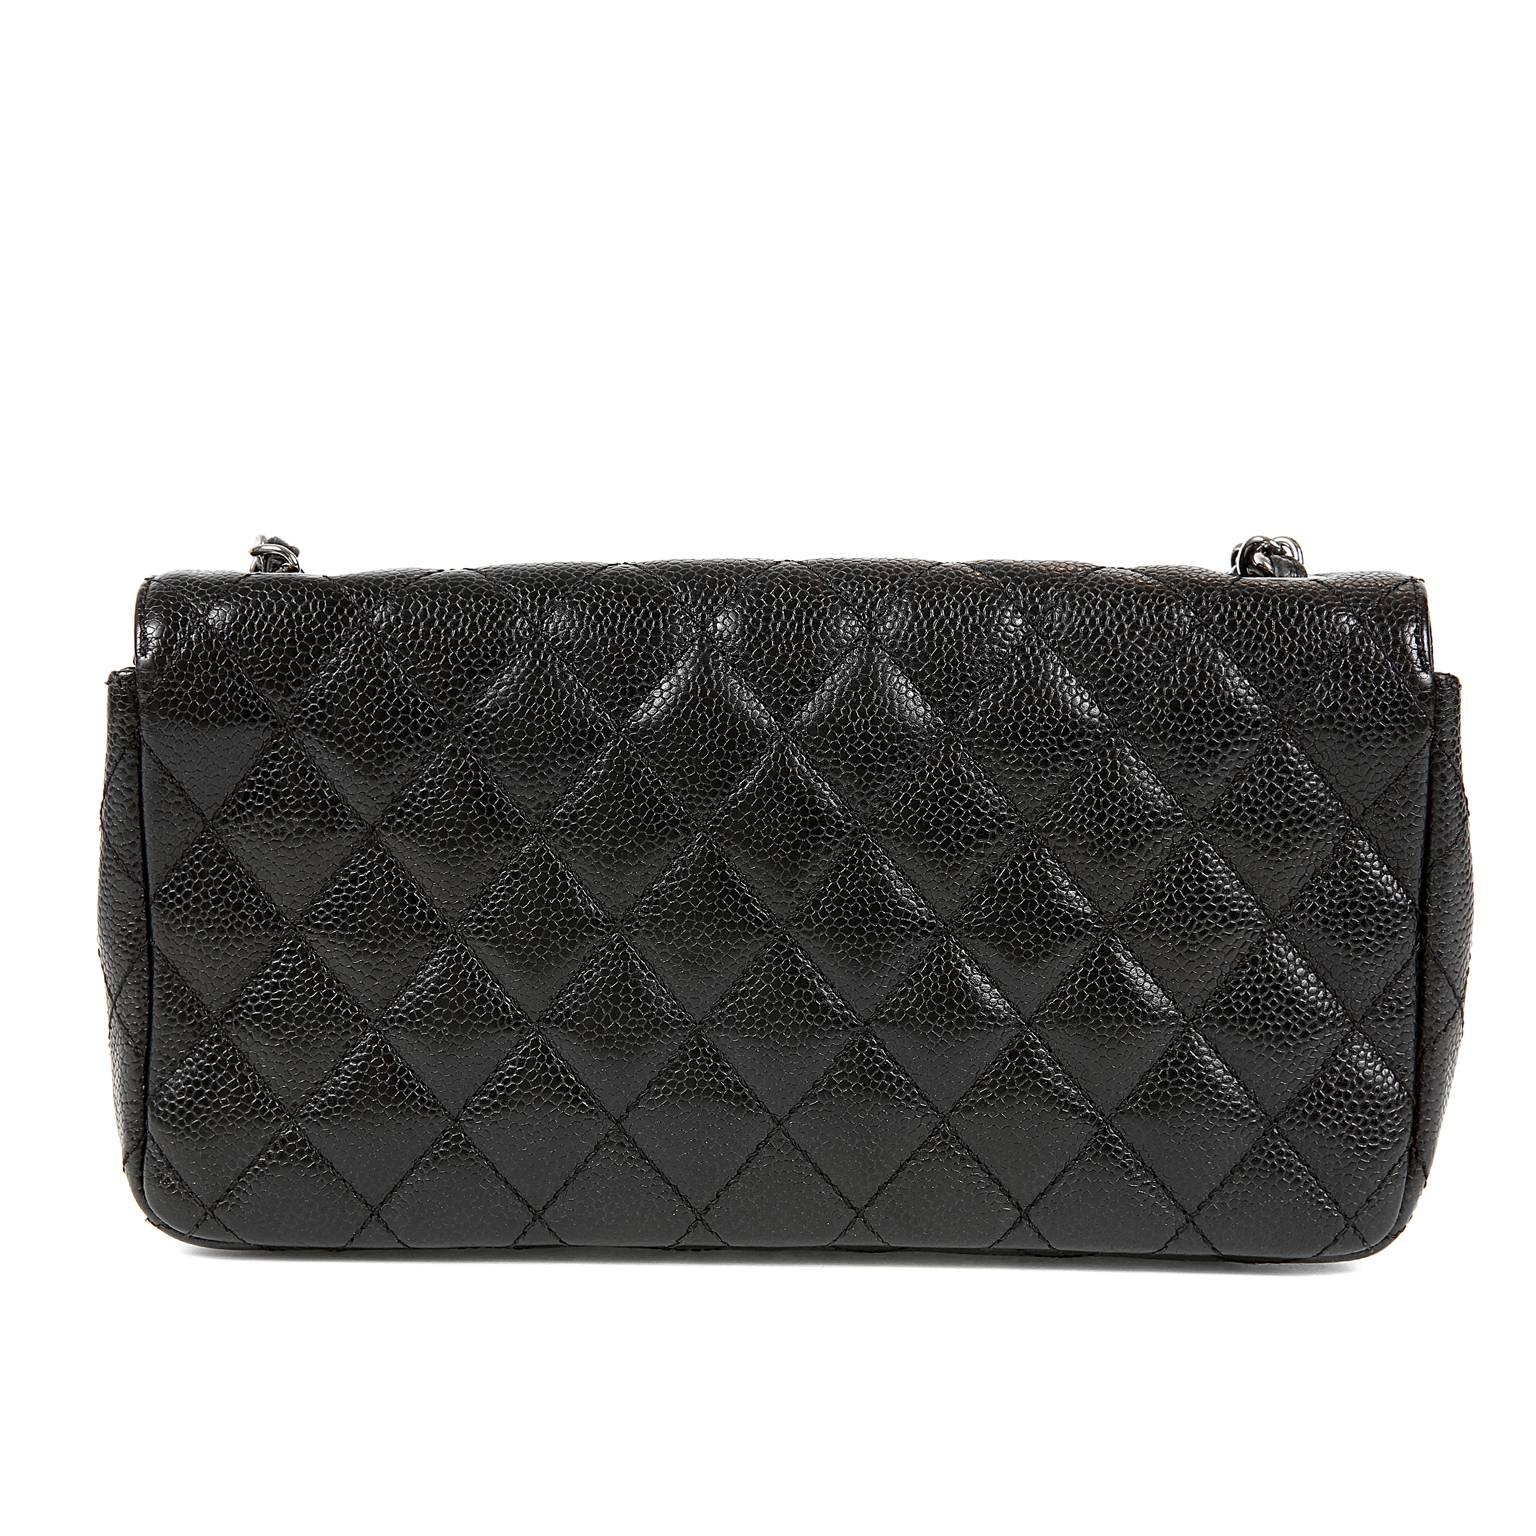 Chanel Black Caviar East West Classic Flap Bag- Nearly Pristine
  Perfectly scaled for easy day to evening transitions, this Chanel is a smart buy.

Black caviar leather is textured and durable.  Quilted in signature Chanel diamond stitched pattern.